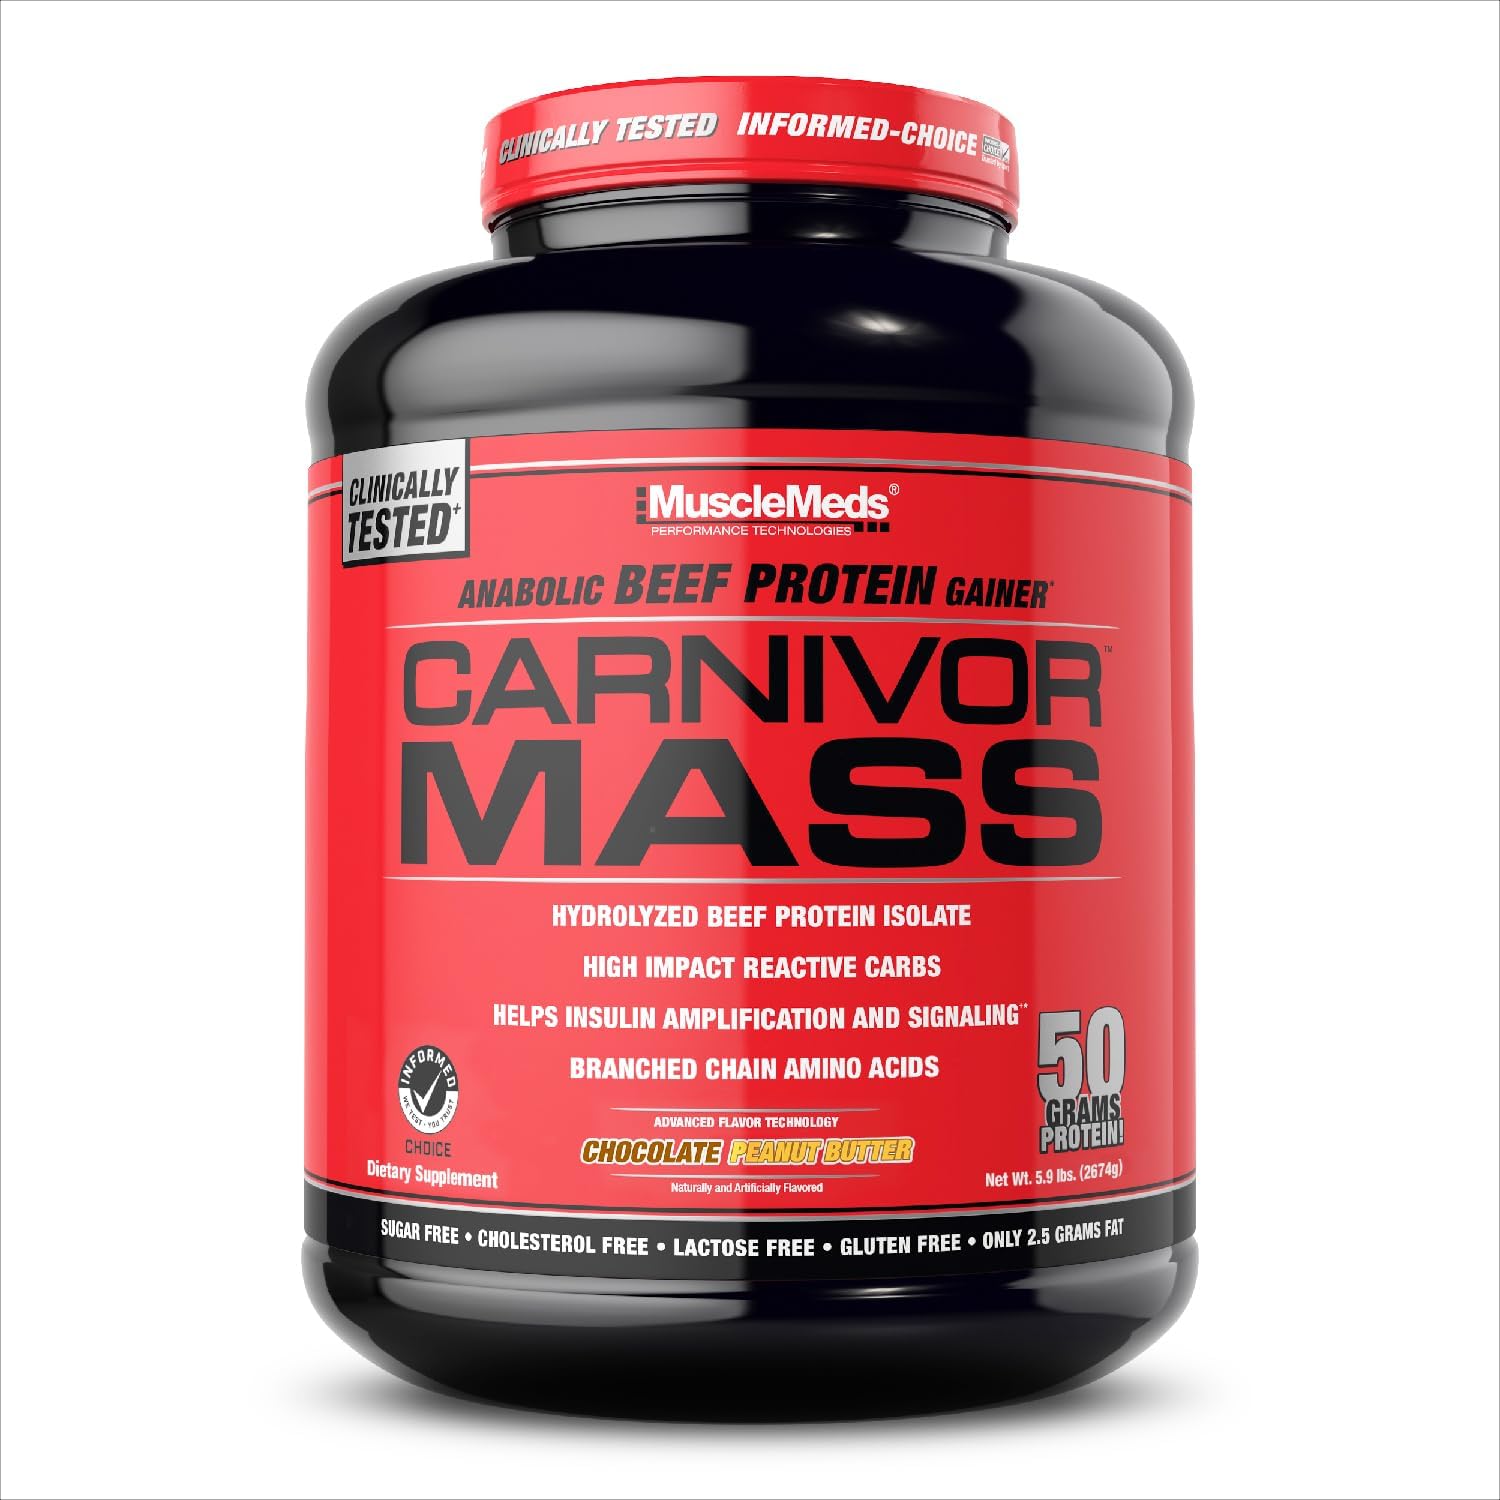 MuscleMeds Carnivor Mass Anabolic Beef Protein Gainer | 6 Pounds